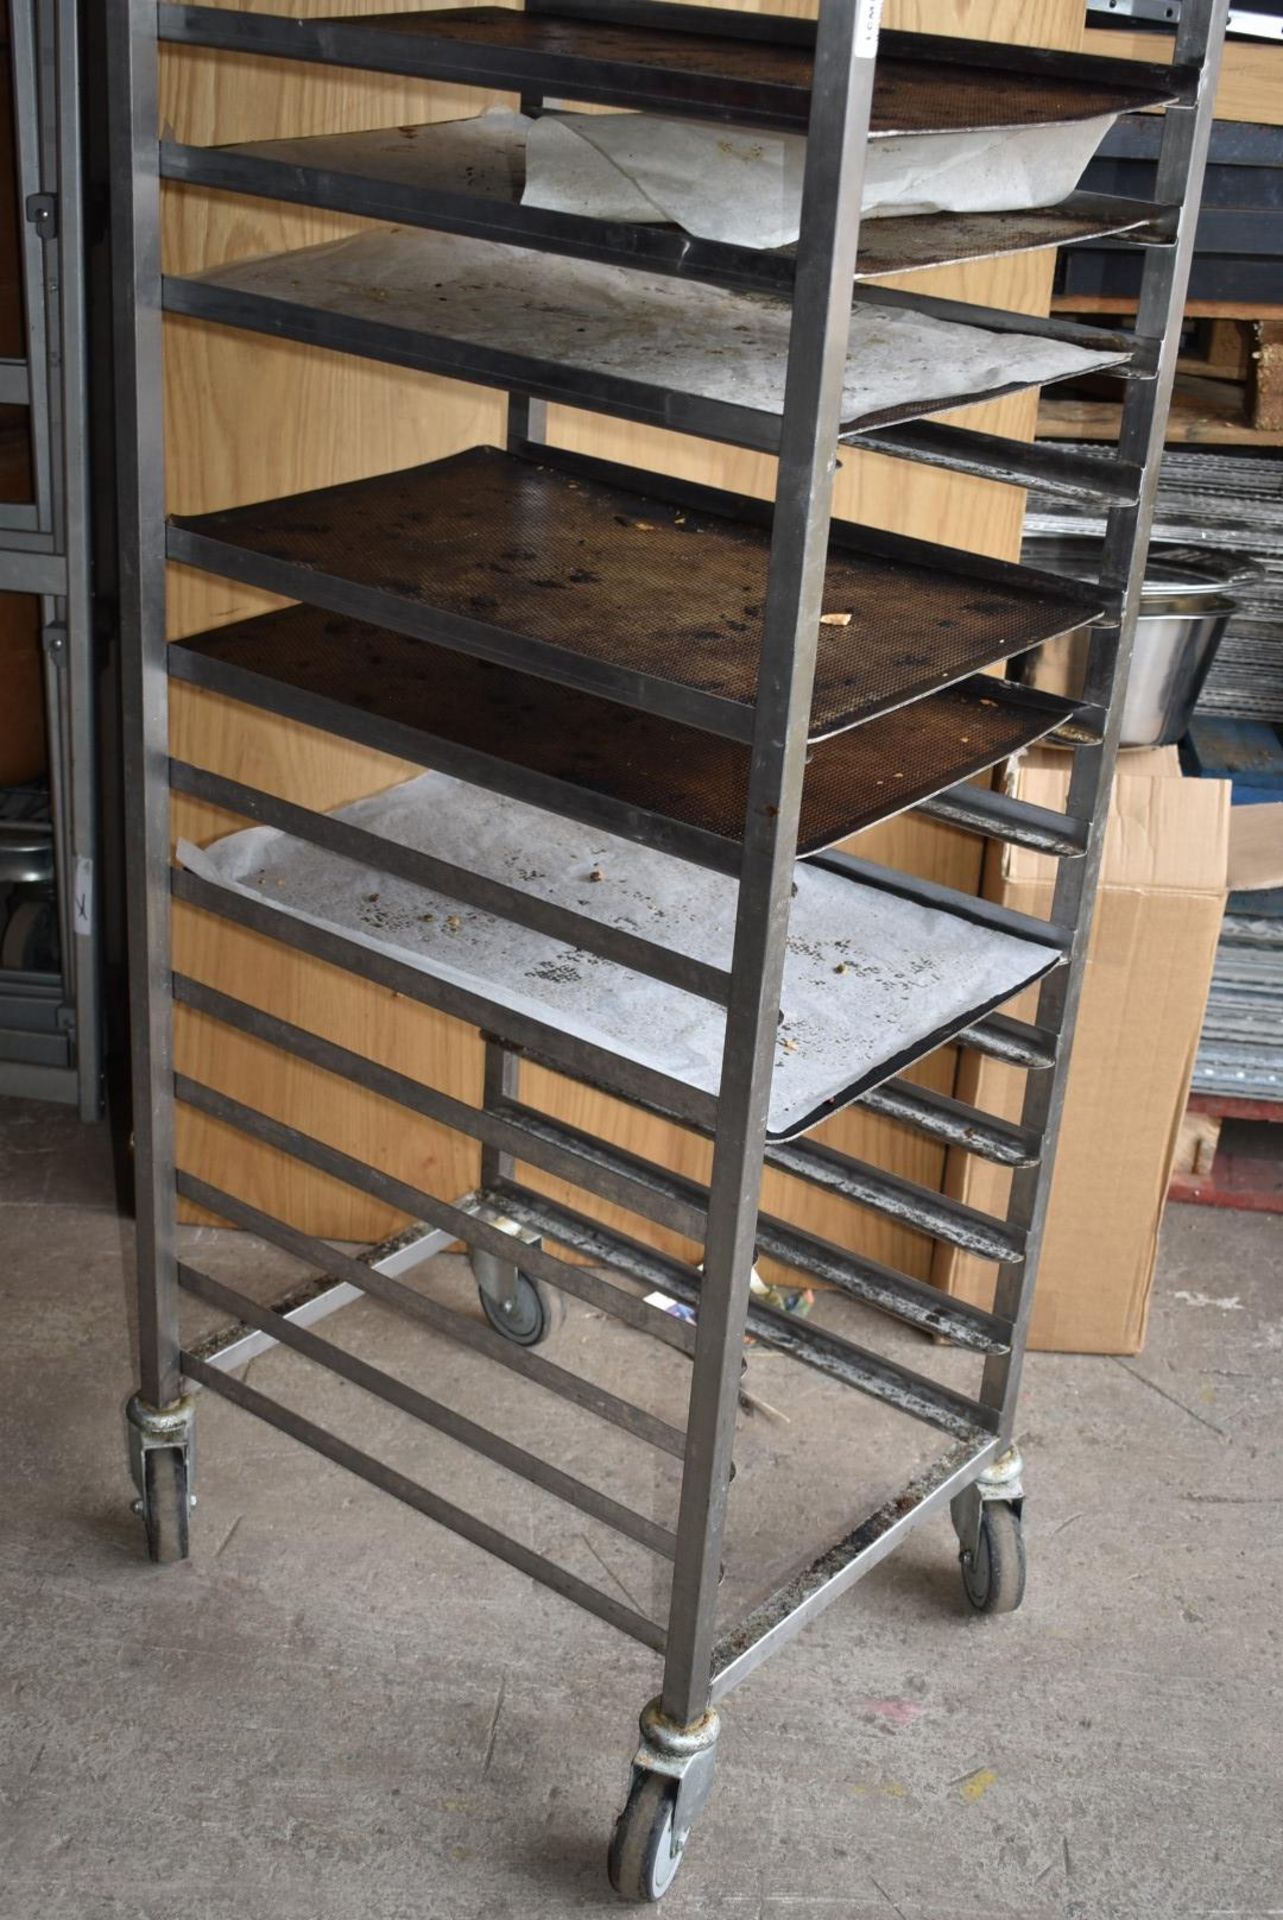 1 x Bakers 18 Tier Mobile Tray Rack With 6 Perforated Trays - Stainless Steel With Castors - - Image 3 of 6